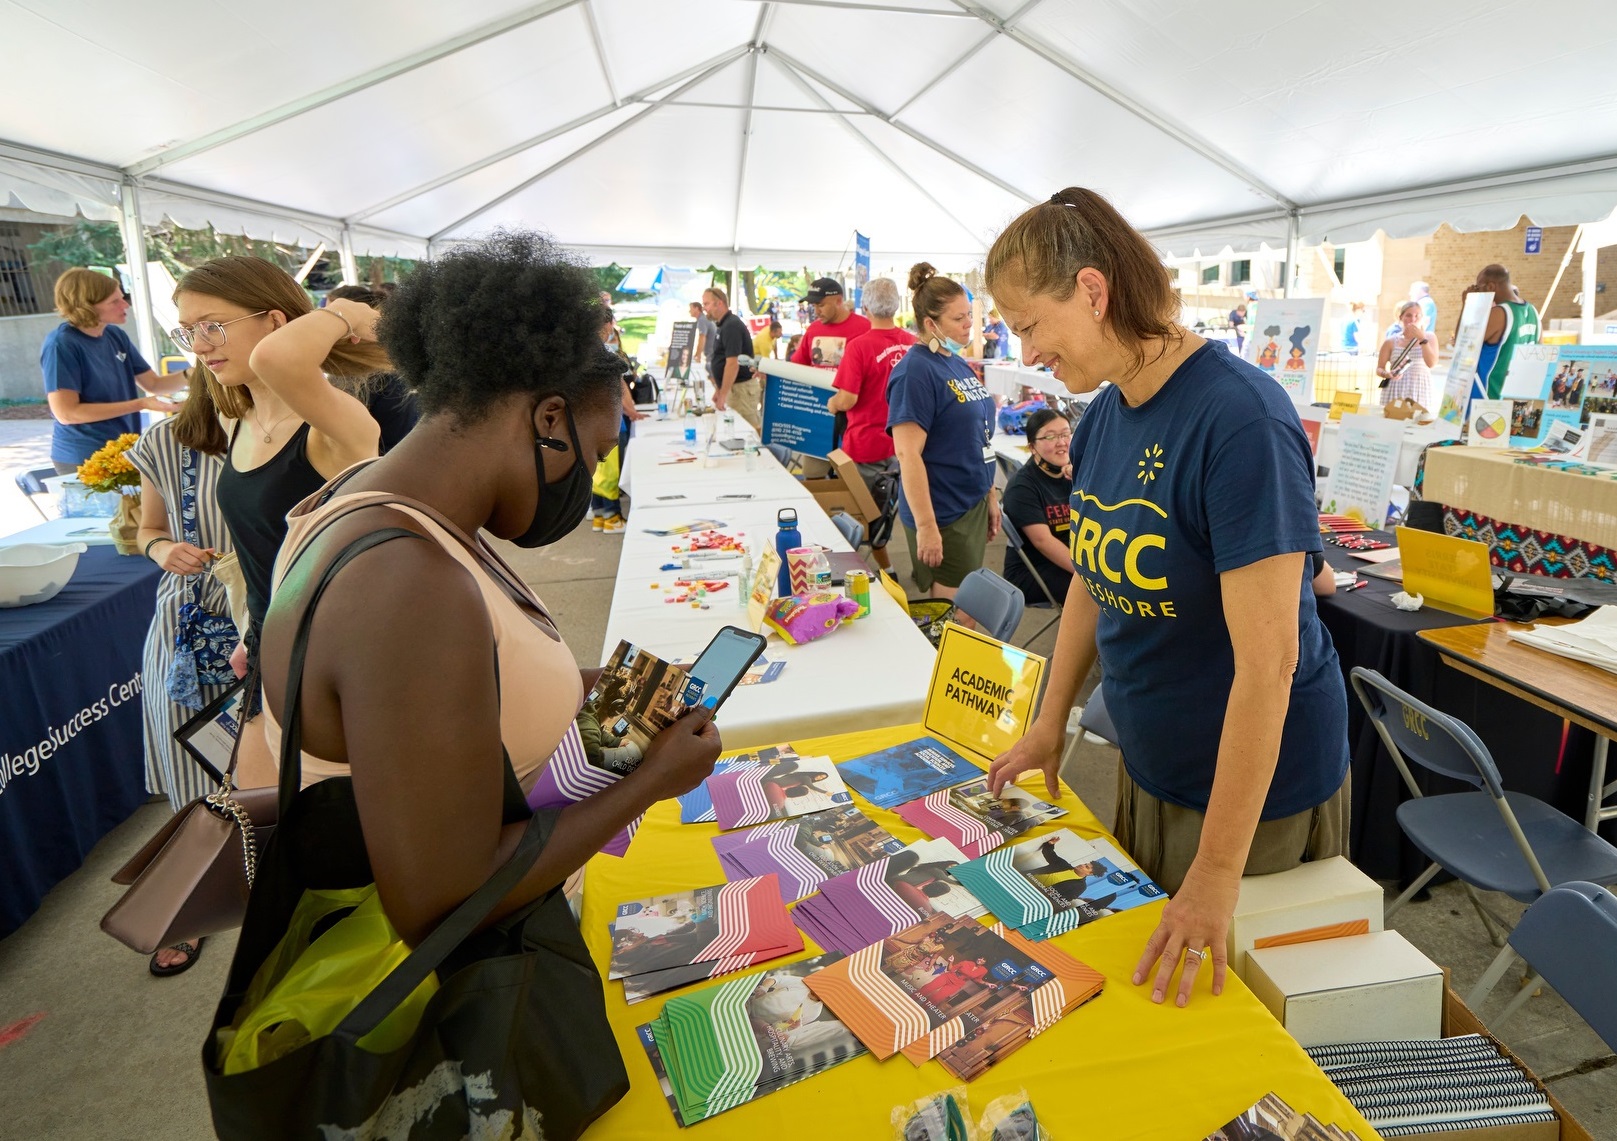 grcc-fall-enrollment-up-4-4-sparked-by-students-embracing-futures-for